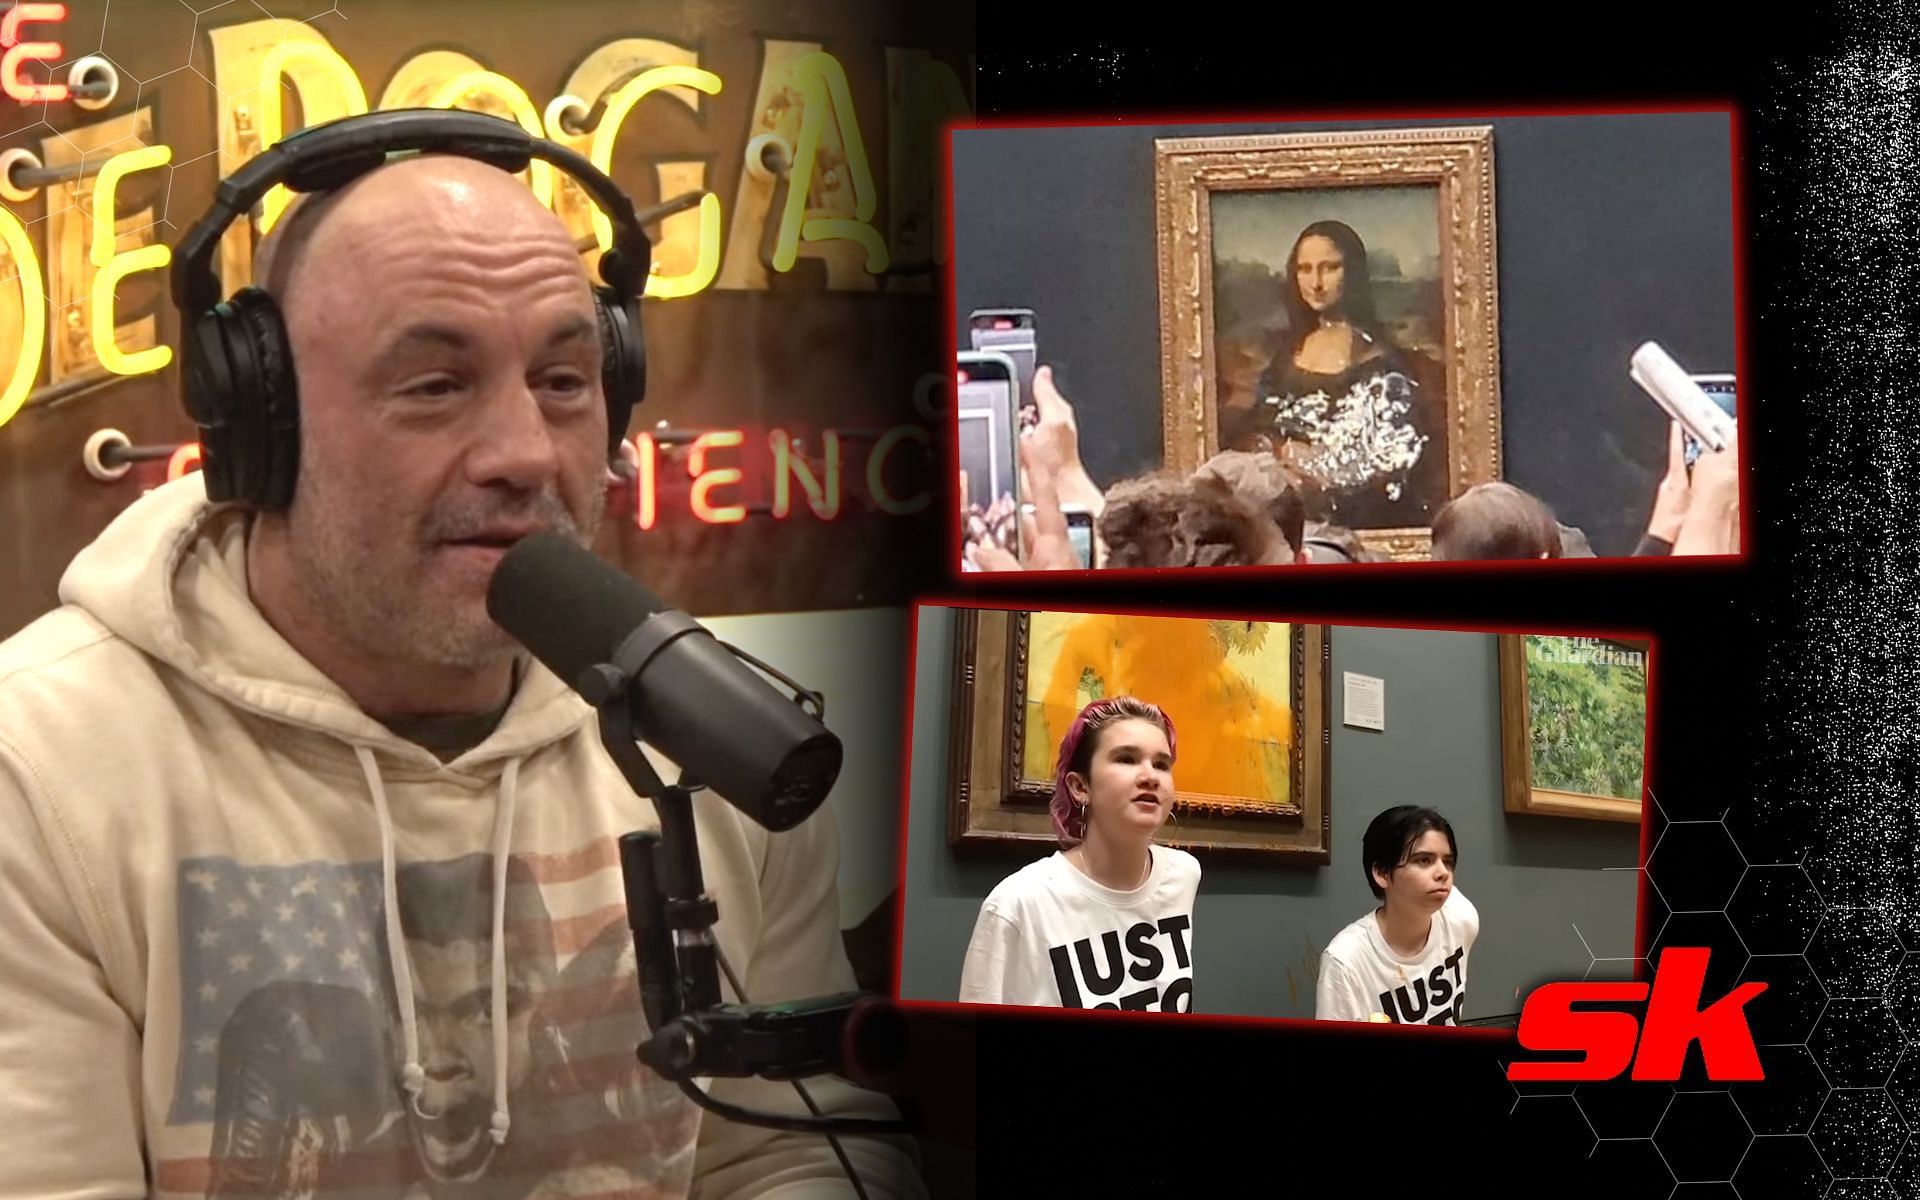  Joe Rogan discusses climate change activists vandalising famous paintings. [Image credits: YouTube/PowerfulJRE; LiveMint; The Guardian]